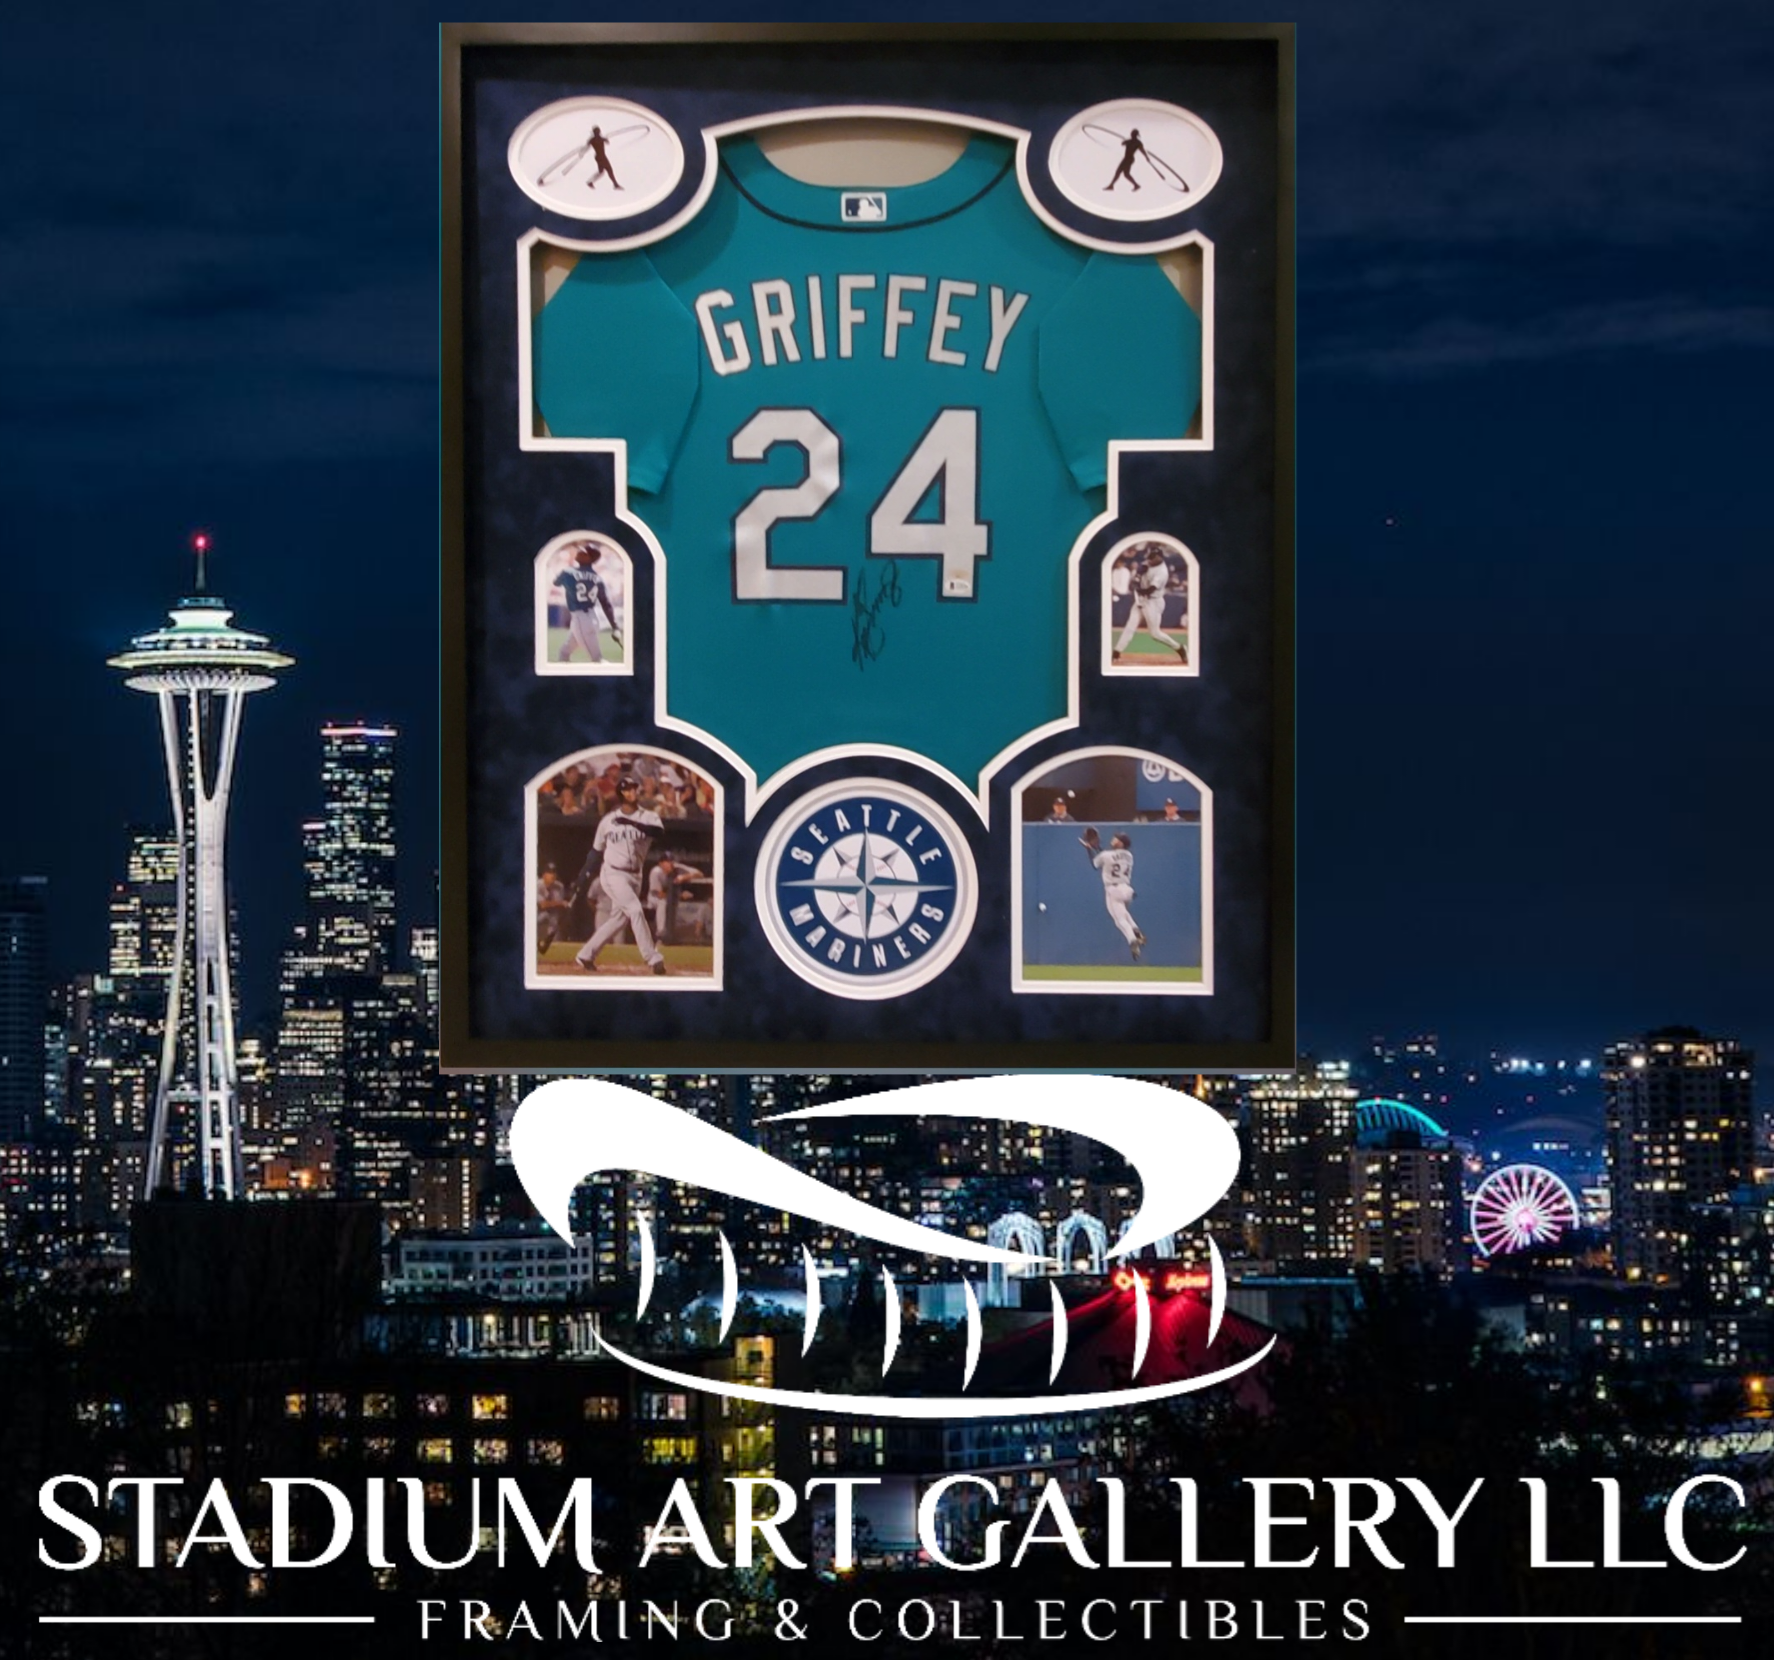 autographed signed and framed baseball jerseys